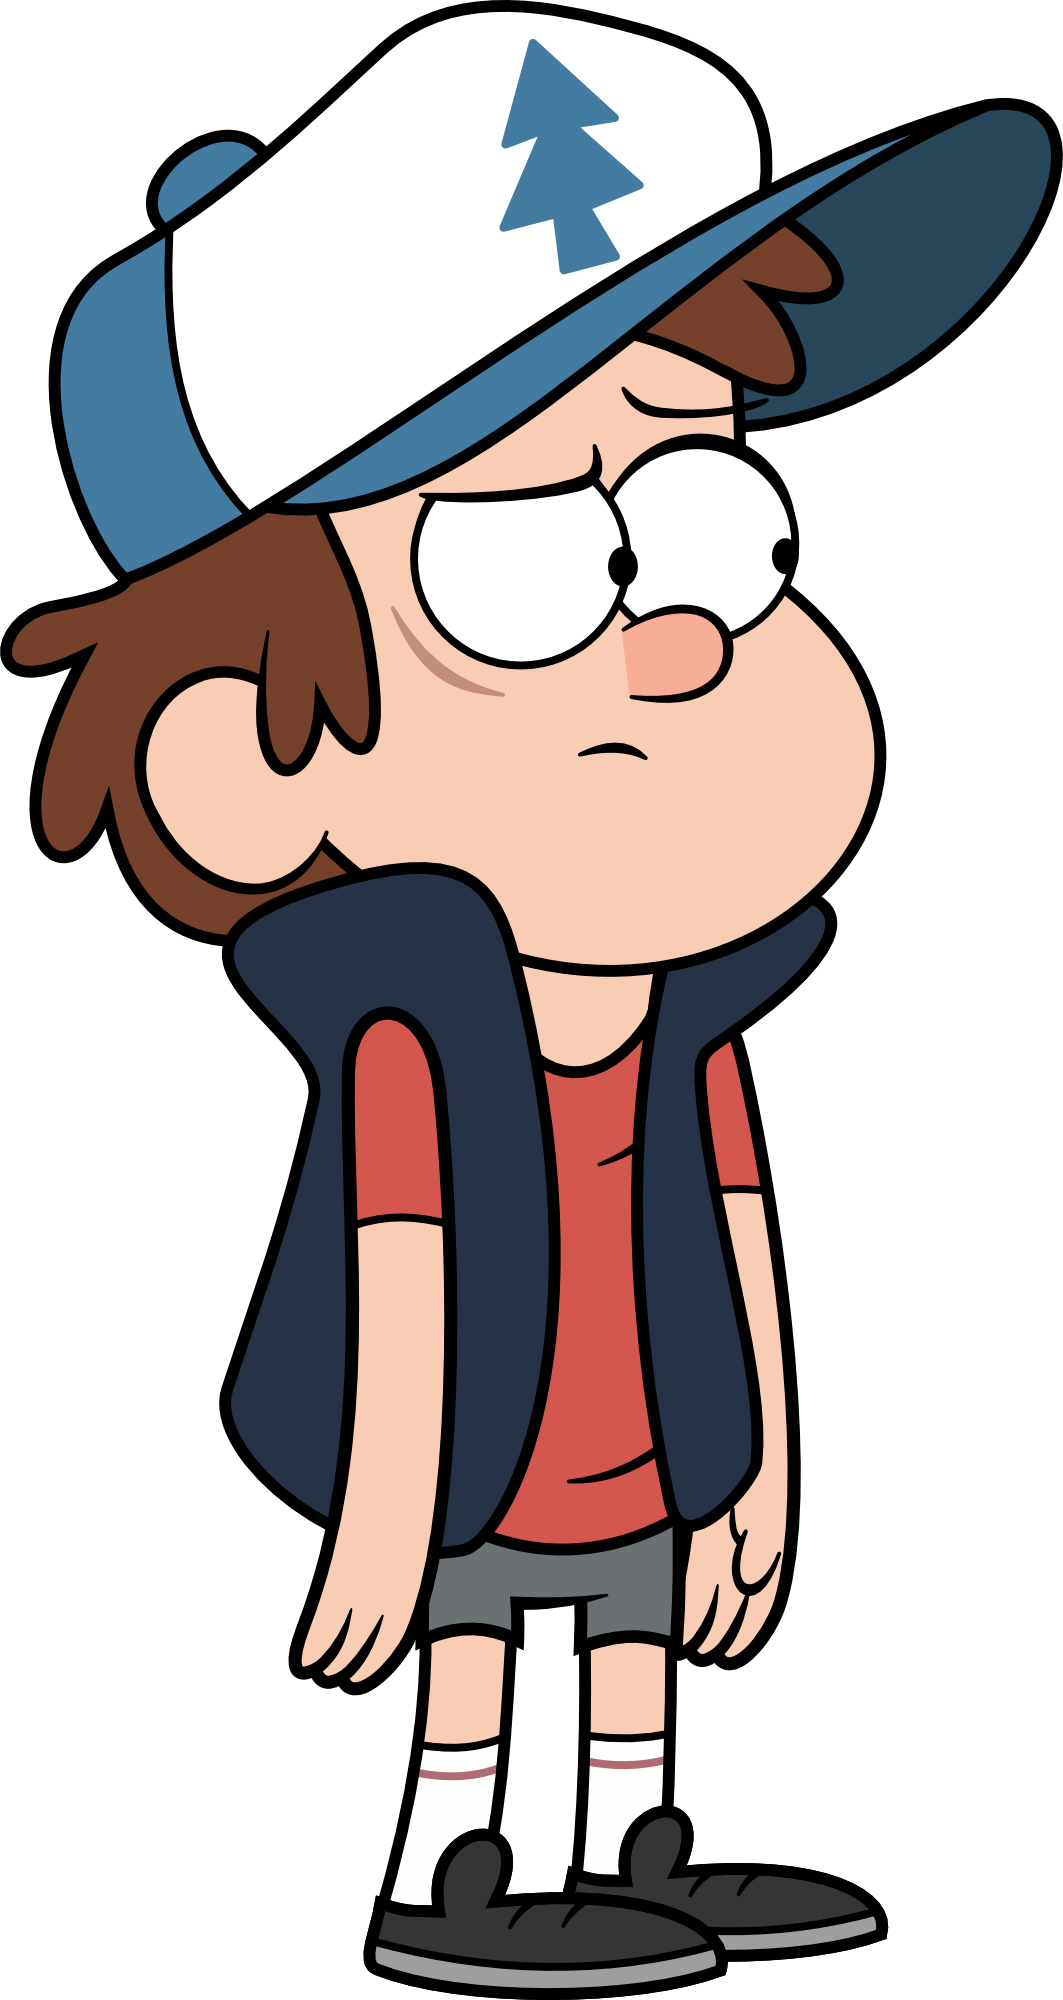 Dipper Pines 1 By Philiptomkins Dipper Pines 1 By Philiptomkins - Dipper From Gravity Falls (1063x2000)